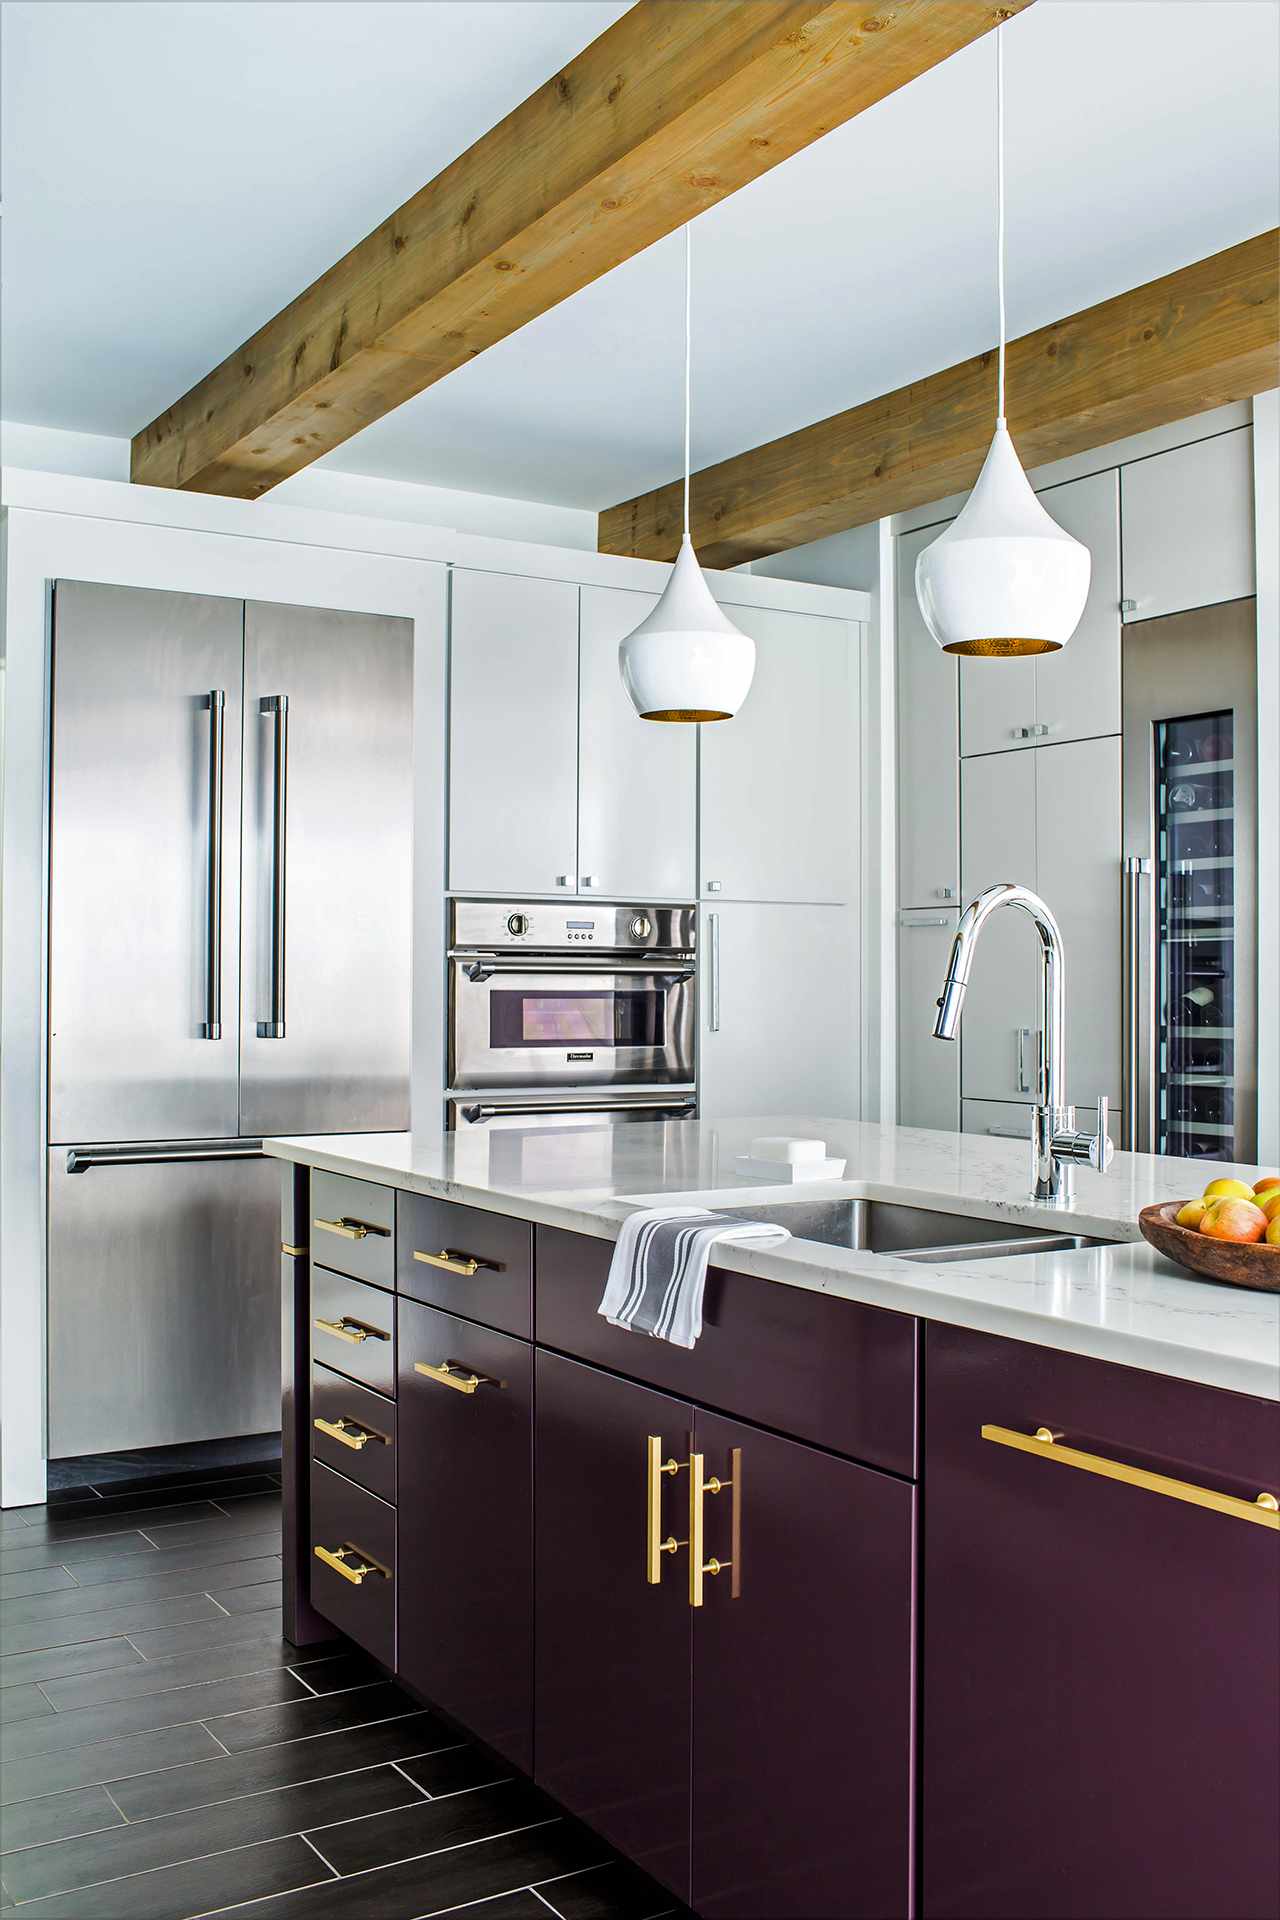 22 Kitchen Cabinetry Trends You Ll Love, What Color Kitchen Cabinets Are Most Popular Now